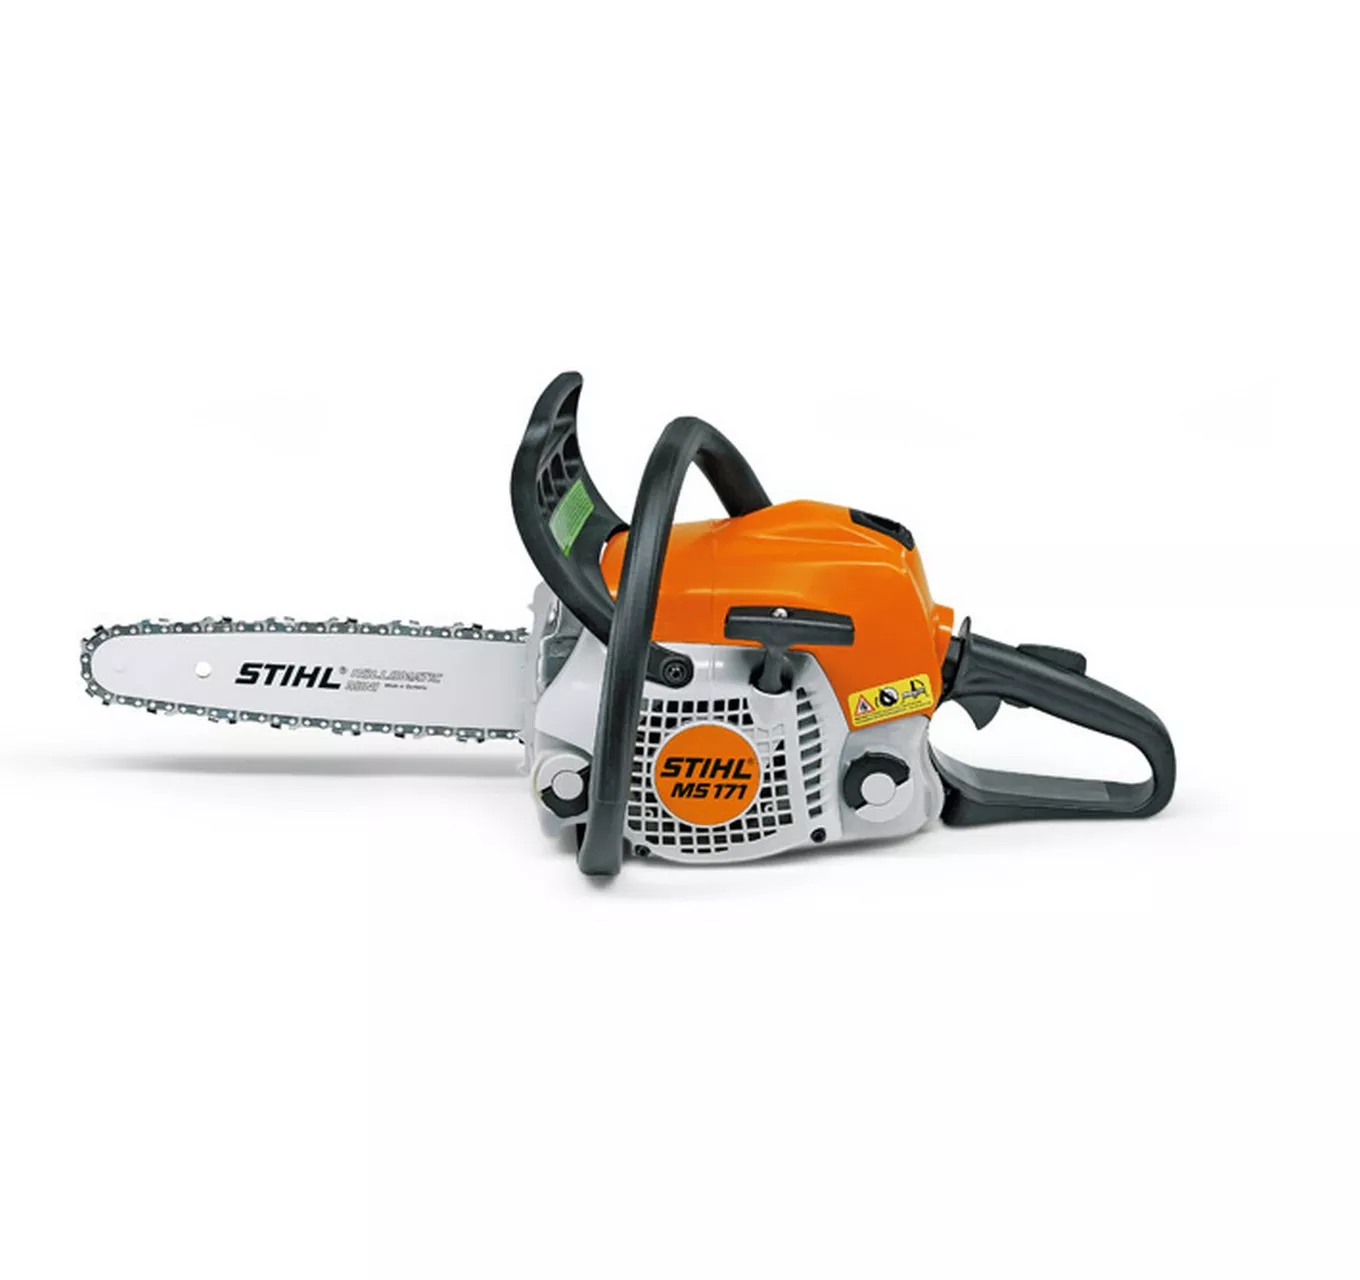 MS 171 Chainsaw 14"